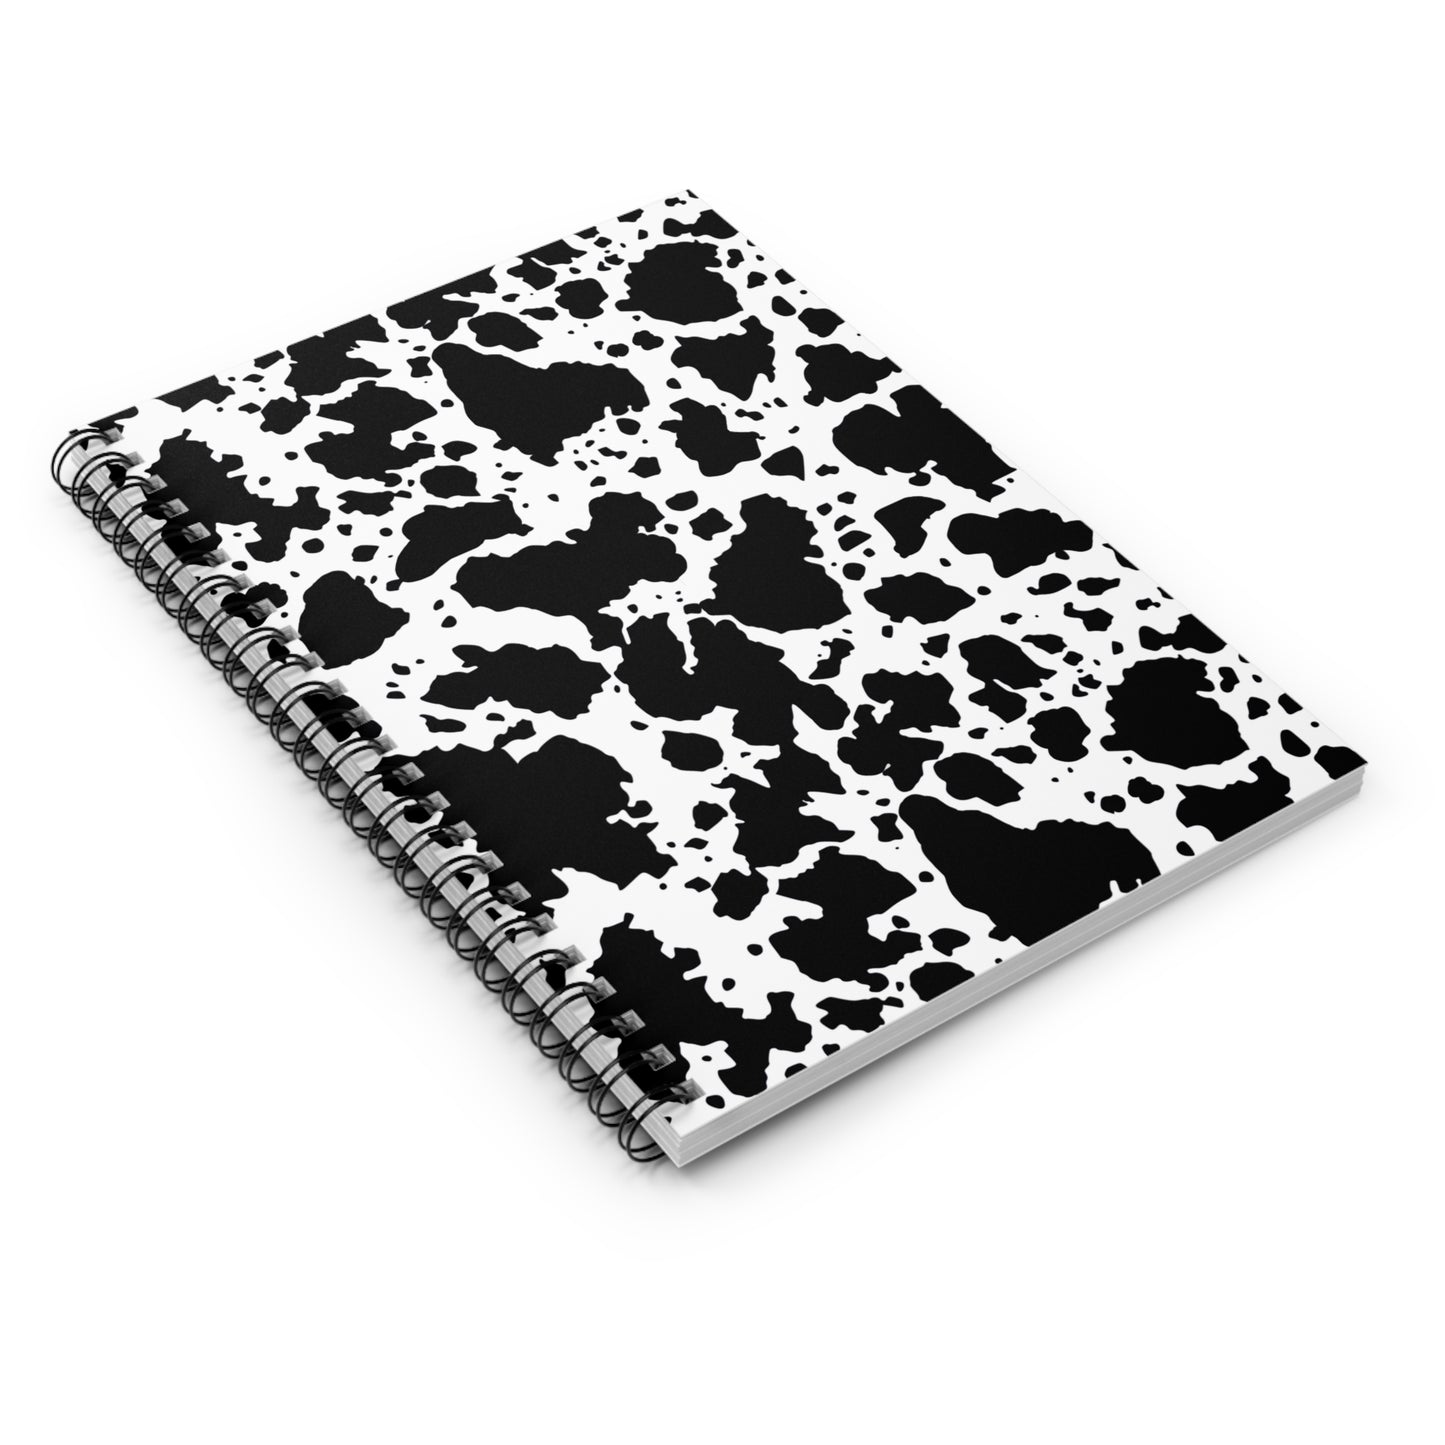 Cow Print Spiral Notebook - Ruled Line